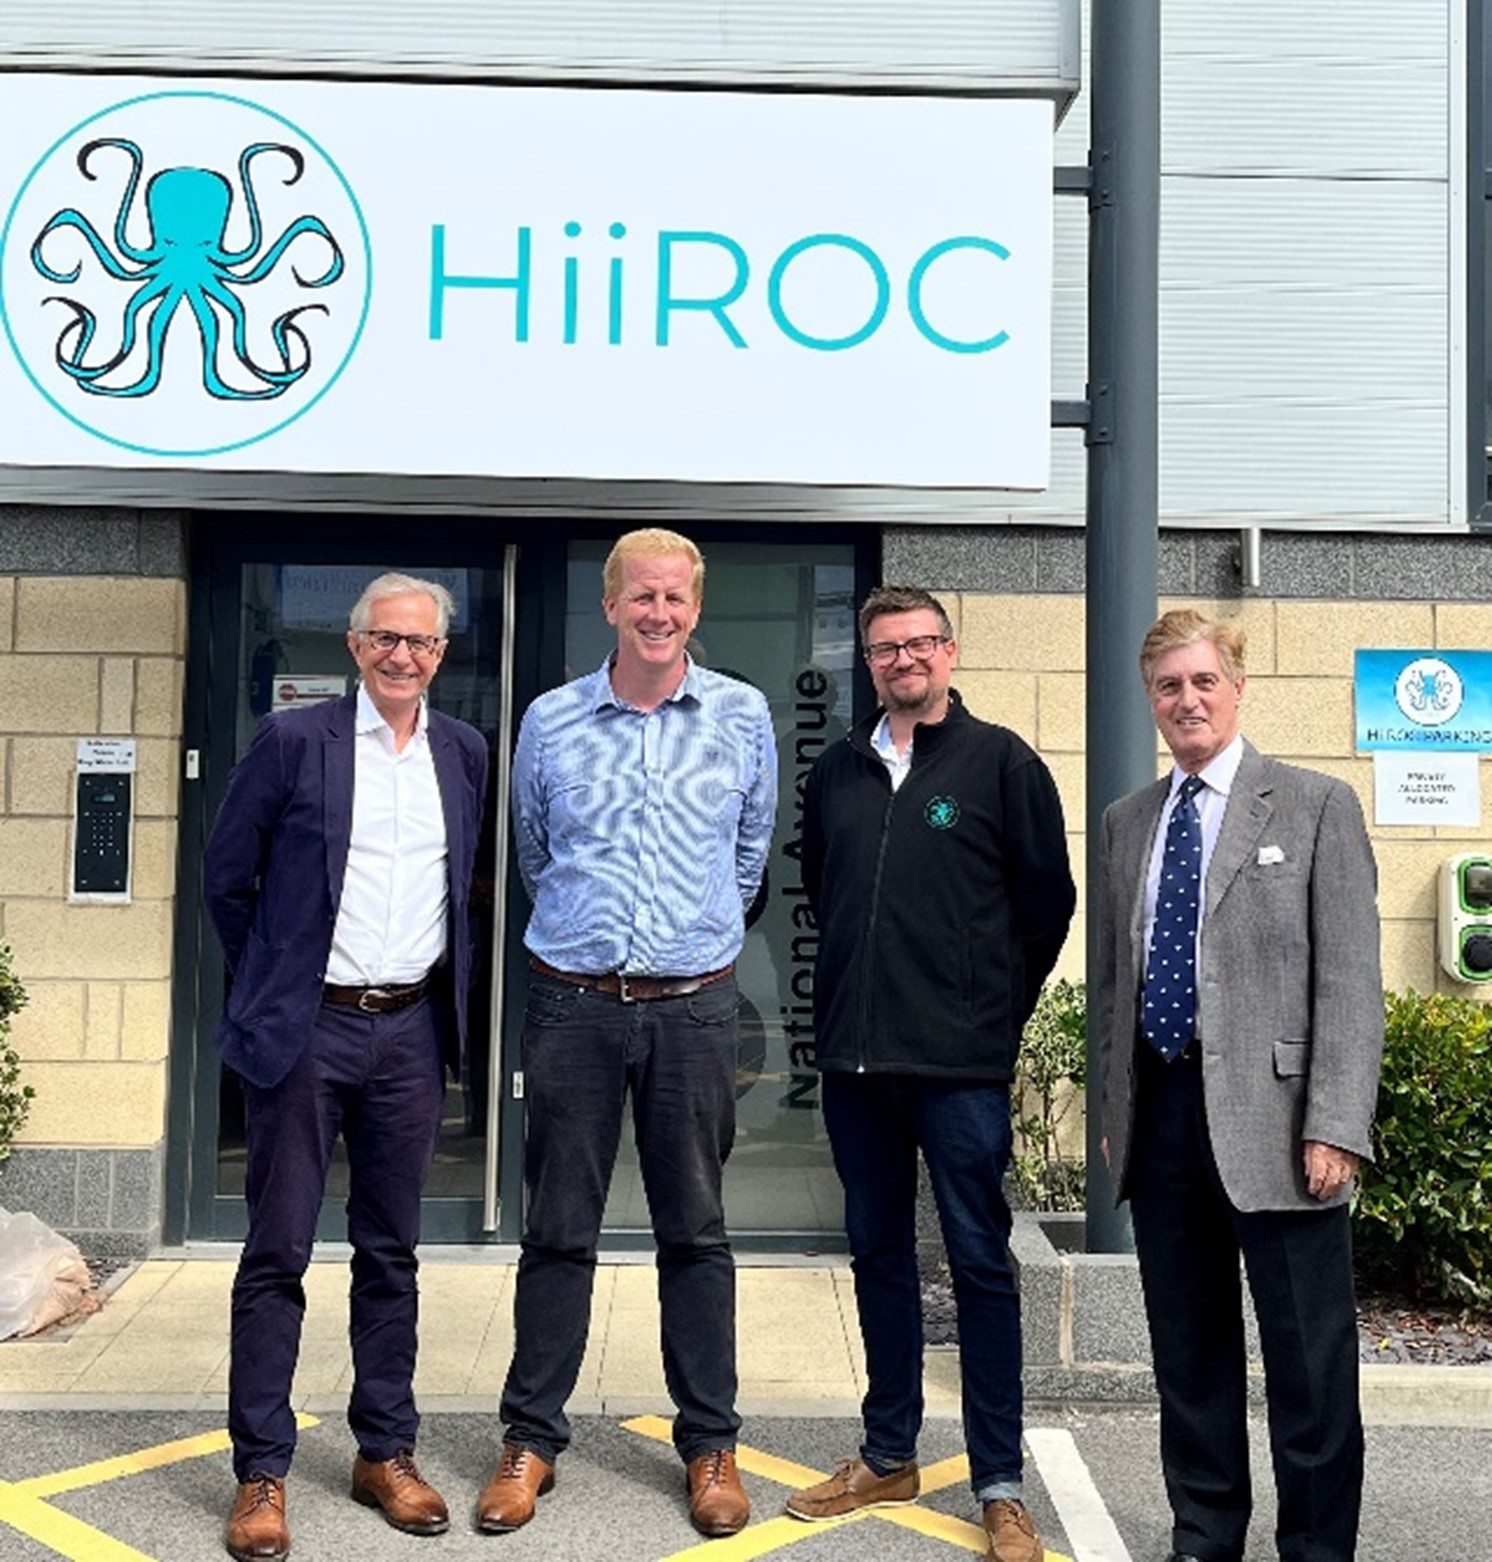 Left to Right; Stephen Savage (Deputy Chair of the HEY LEP Investment Panel), Tim Davies (Chief Executive Officer, HiiROC), Richard Scott (Operations Director, HiiROC) and James Newman OBE (Chair of the HEY LEP)